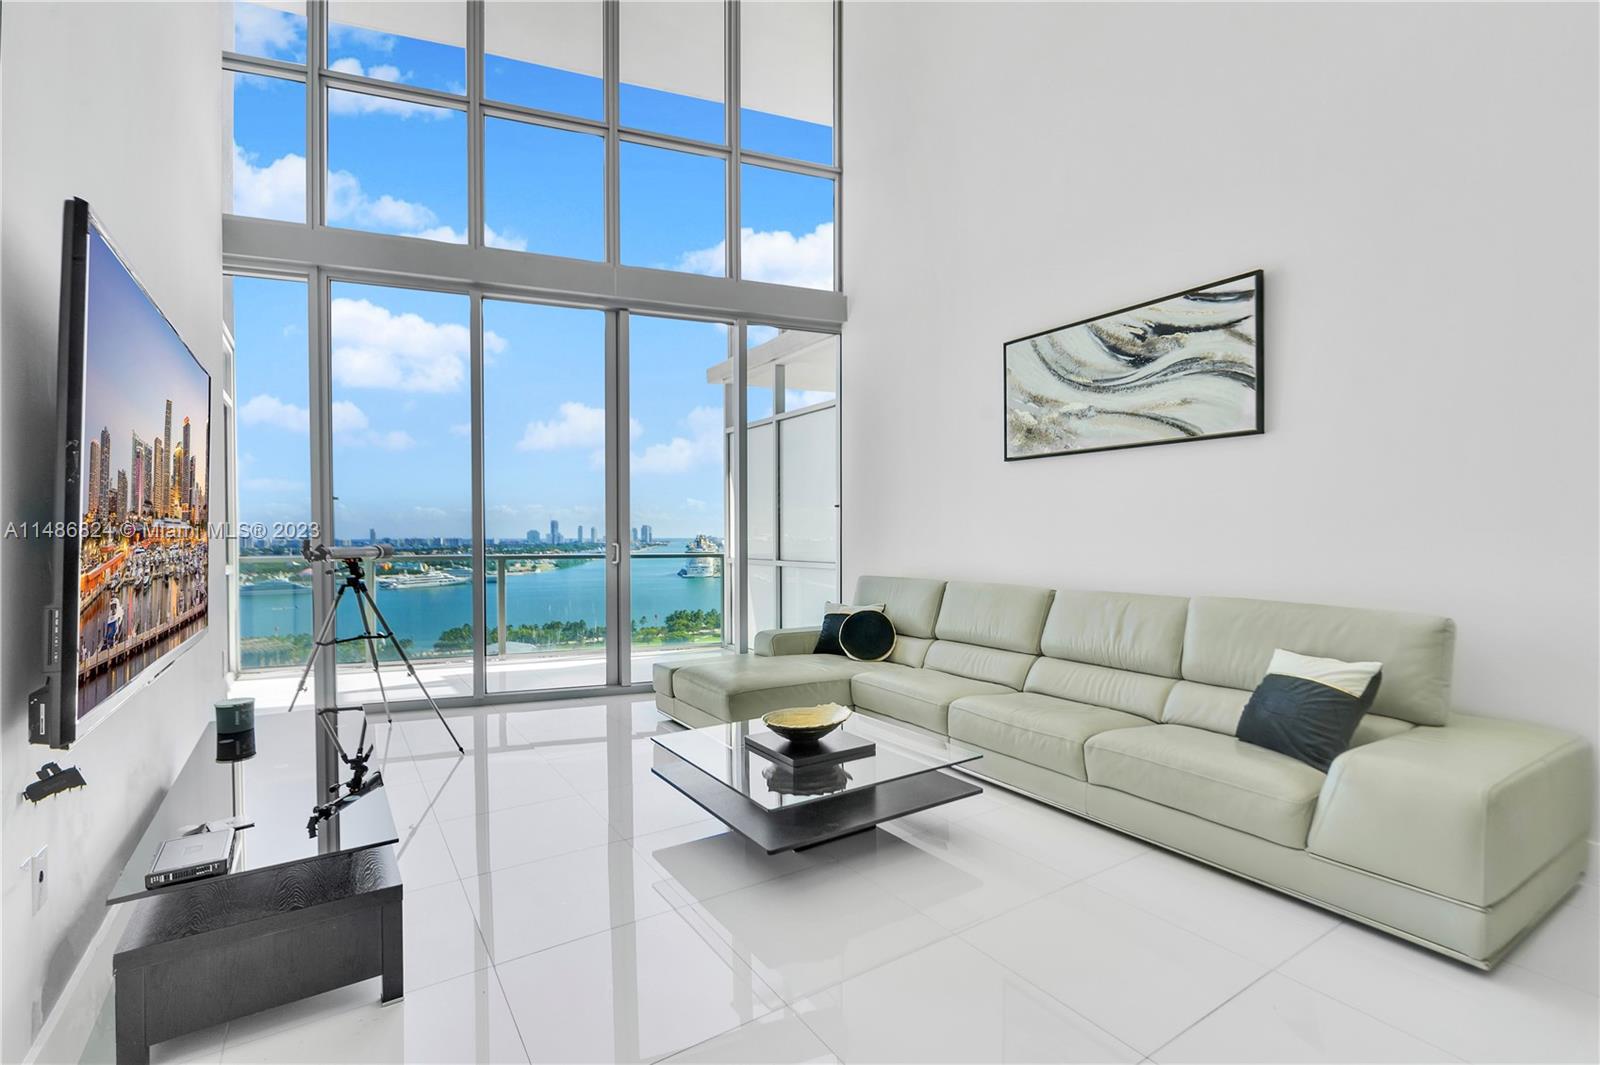 This stunning unit is located in the MARQUIS Residences in the prime of Miami’s Downtown area. 1,675 sq. foot living area on the 21st floor features high ceilings, creating a bright and inviting atmosphere overlooking the bay area right from its very own private balcony. The kitchen is equipped with top-of-the-line stainless steel appliances, sleek cabinetry, and a large center island. The master bedroom is a true retreat, boasting a generous layout, indoor balcony, a spacious walk-in closet, and a private en-suite bathroom. The additional room provides versatility that can double as den or office and offers ample closet space. An in-unit washer and dryer are also included. Access to a range of amenities, including a state-of-the-art fitness center, a rooftop pool, and garage parking.